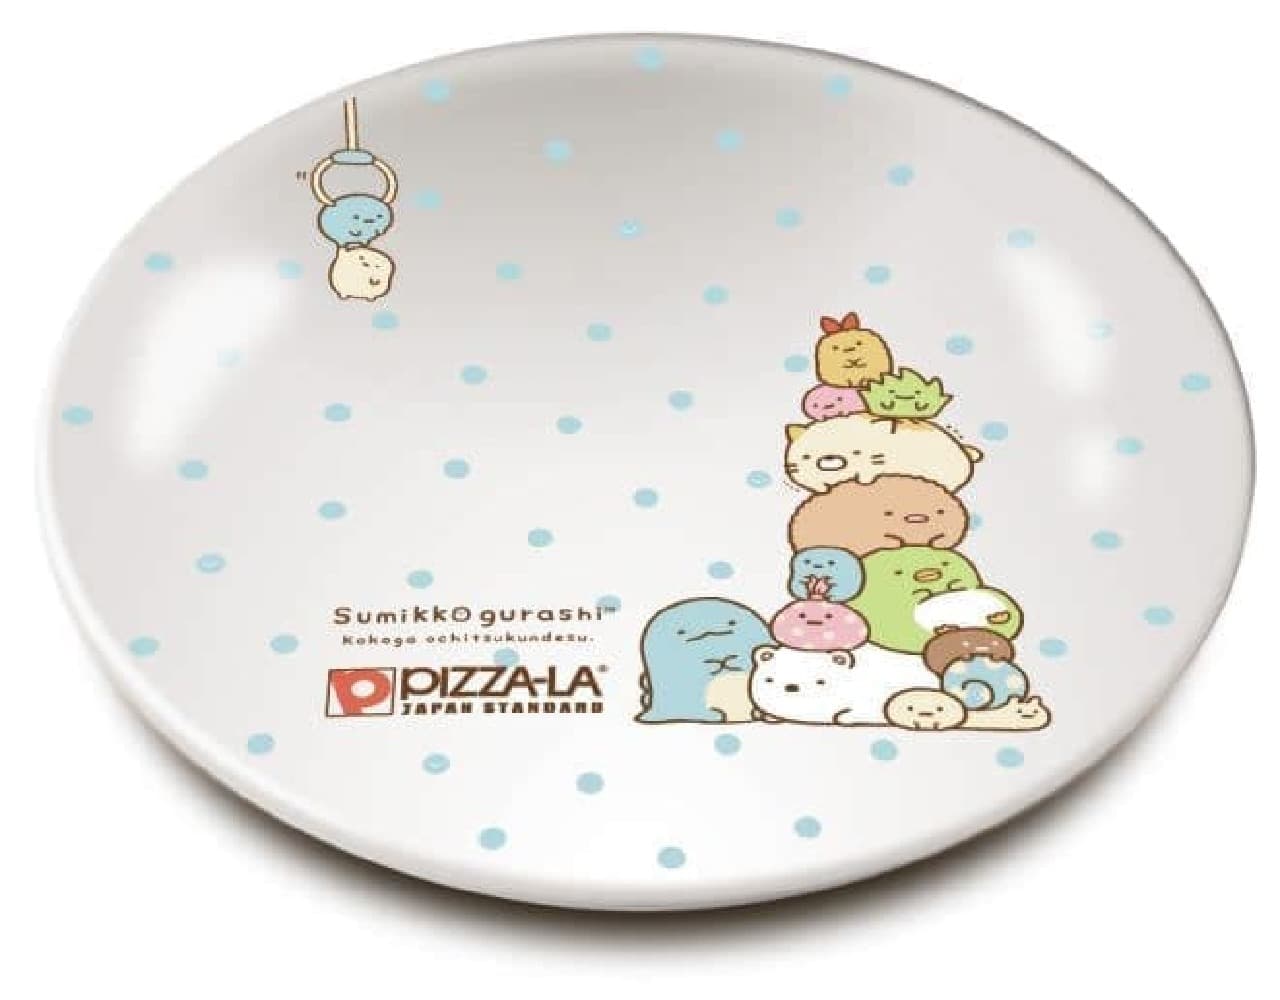 The second special pack of Pizza-La "Sumikko Gurashi"